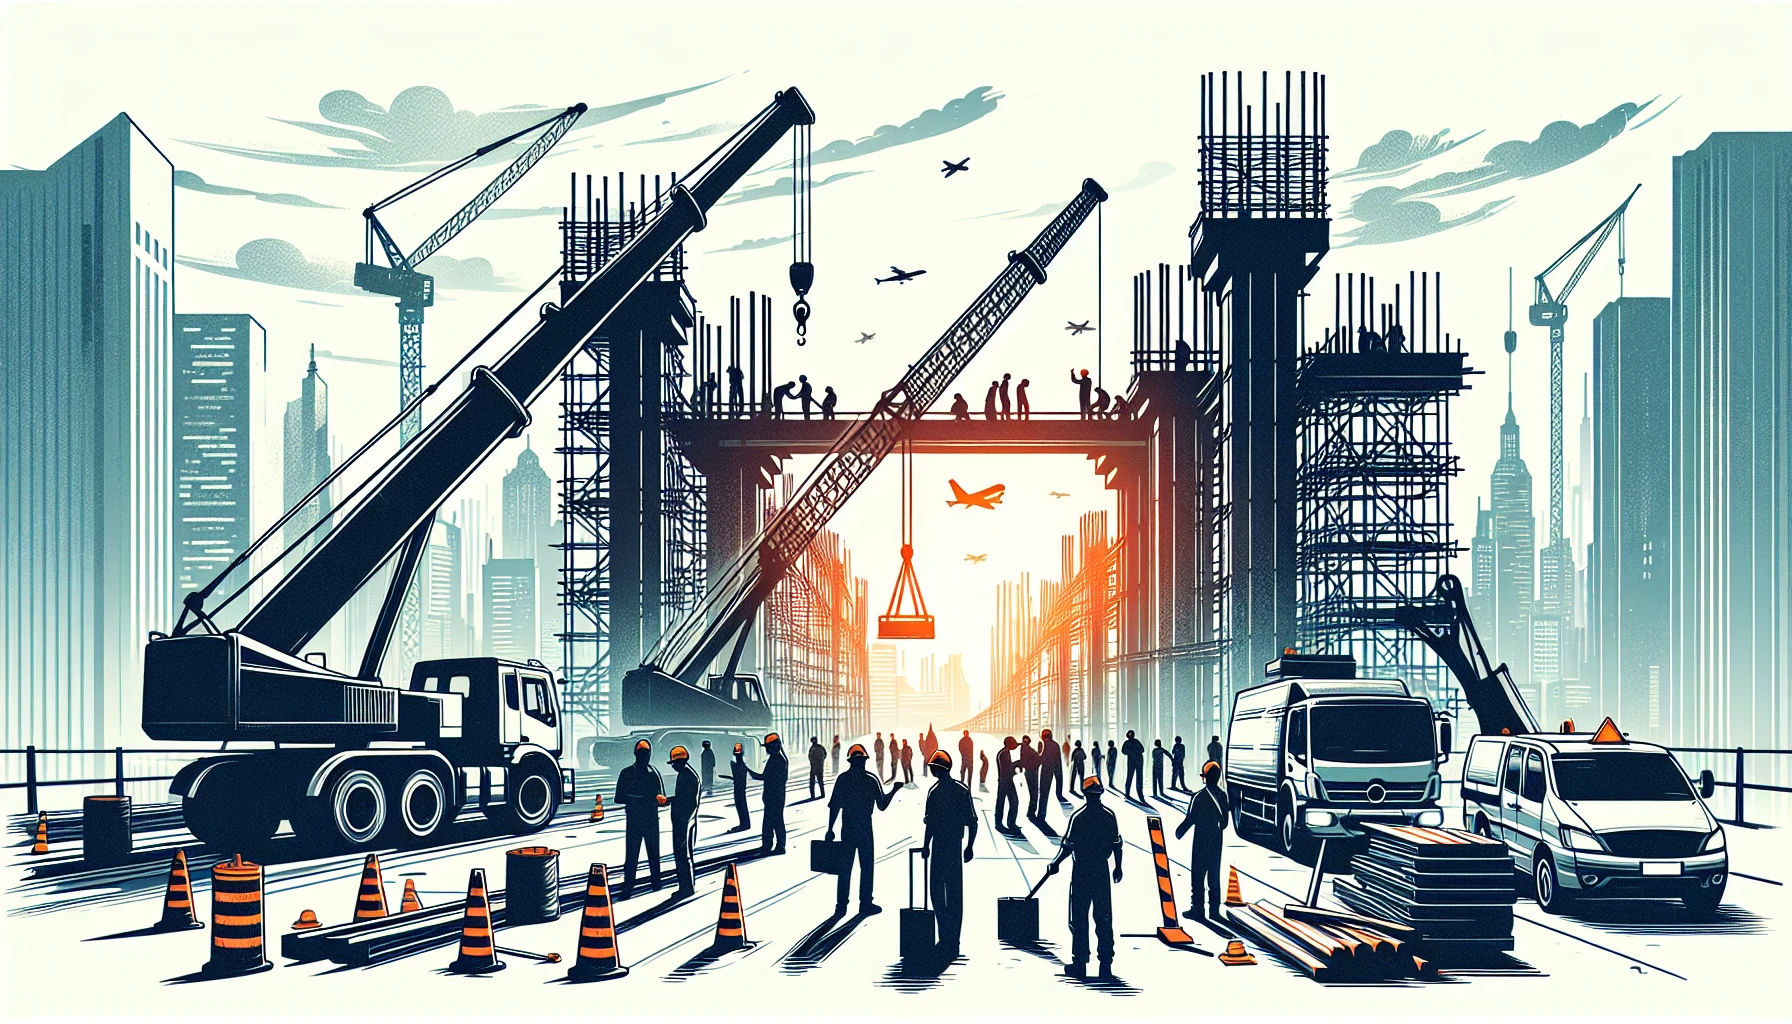 Construction engineering and project management at a bustling site